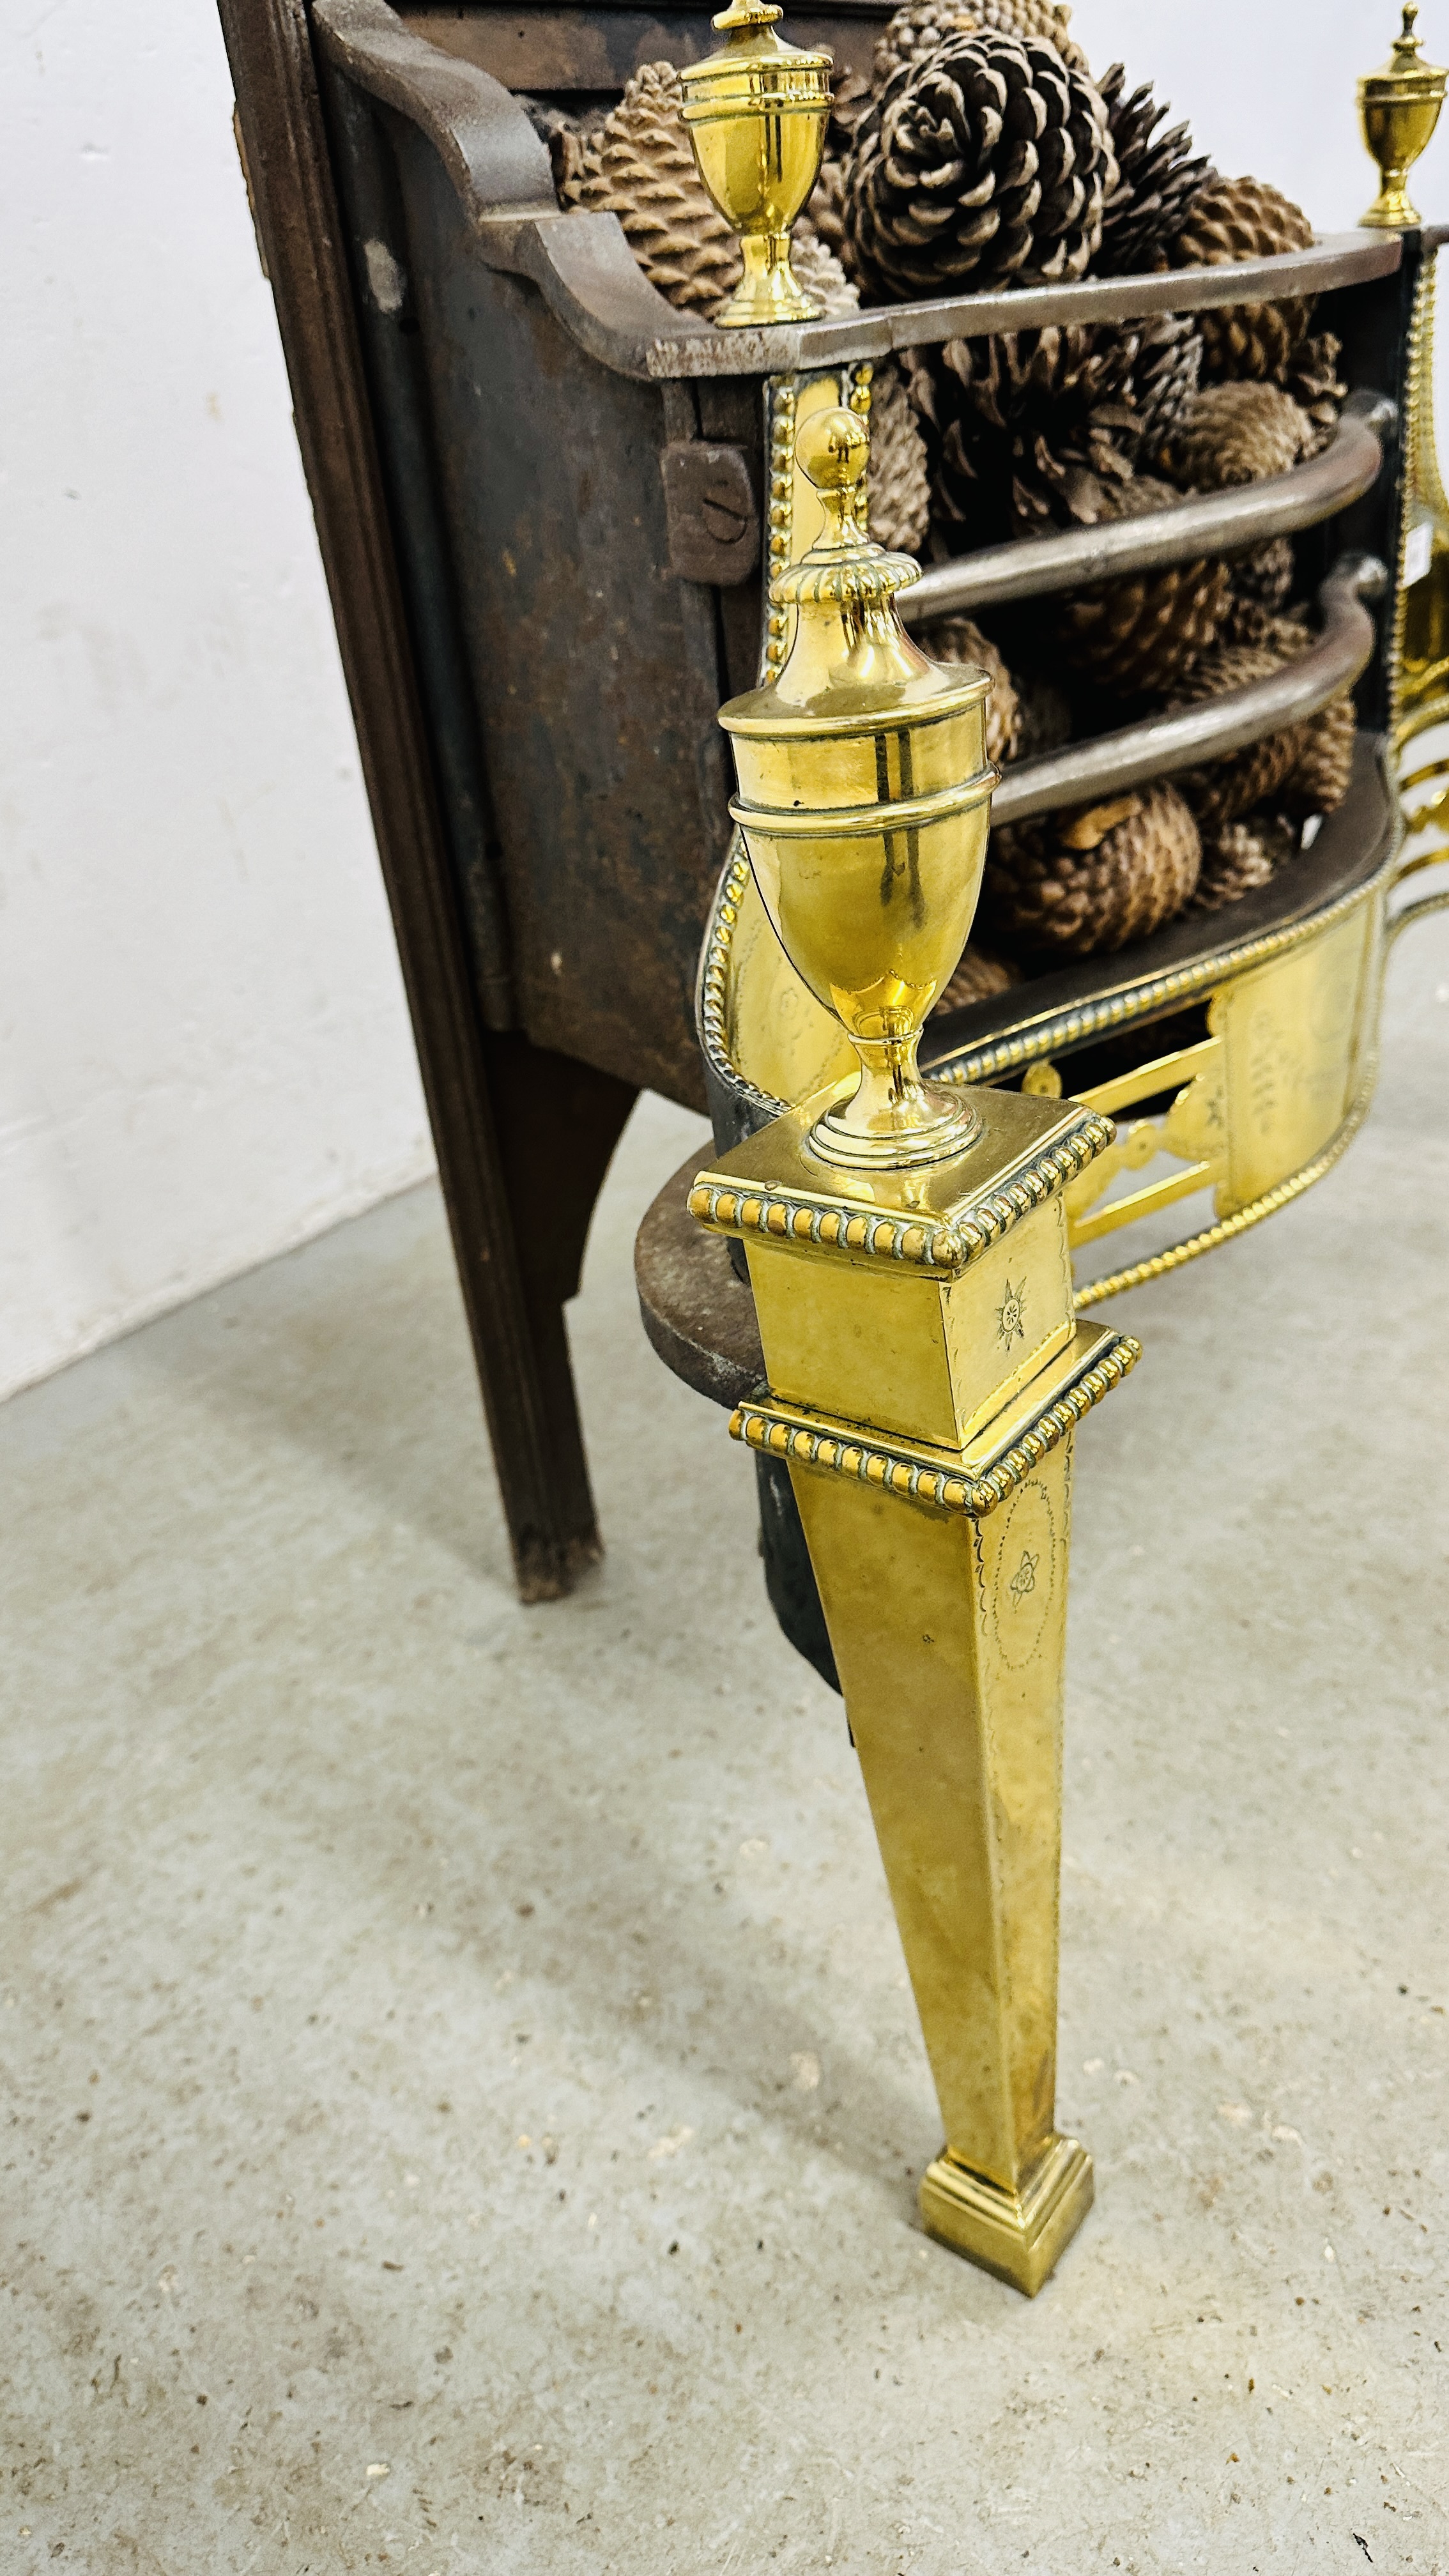 IMPRESSIVE HEAVY CAST FIRE BASKET WITH BRASS DETAILING - OVERALL WIDTH 83CM. - Image 11 of 11